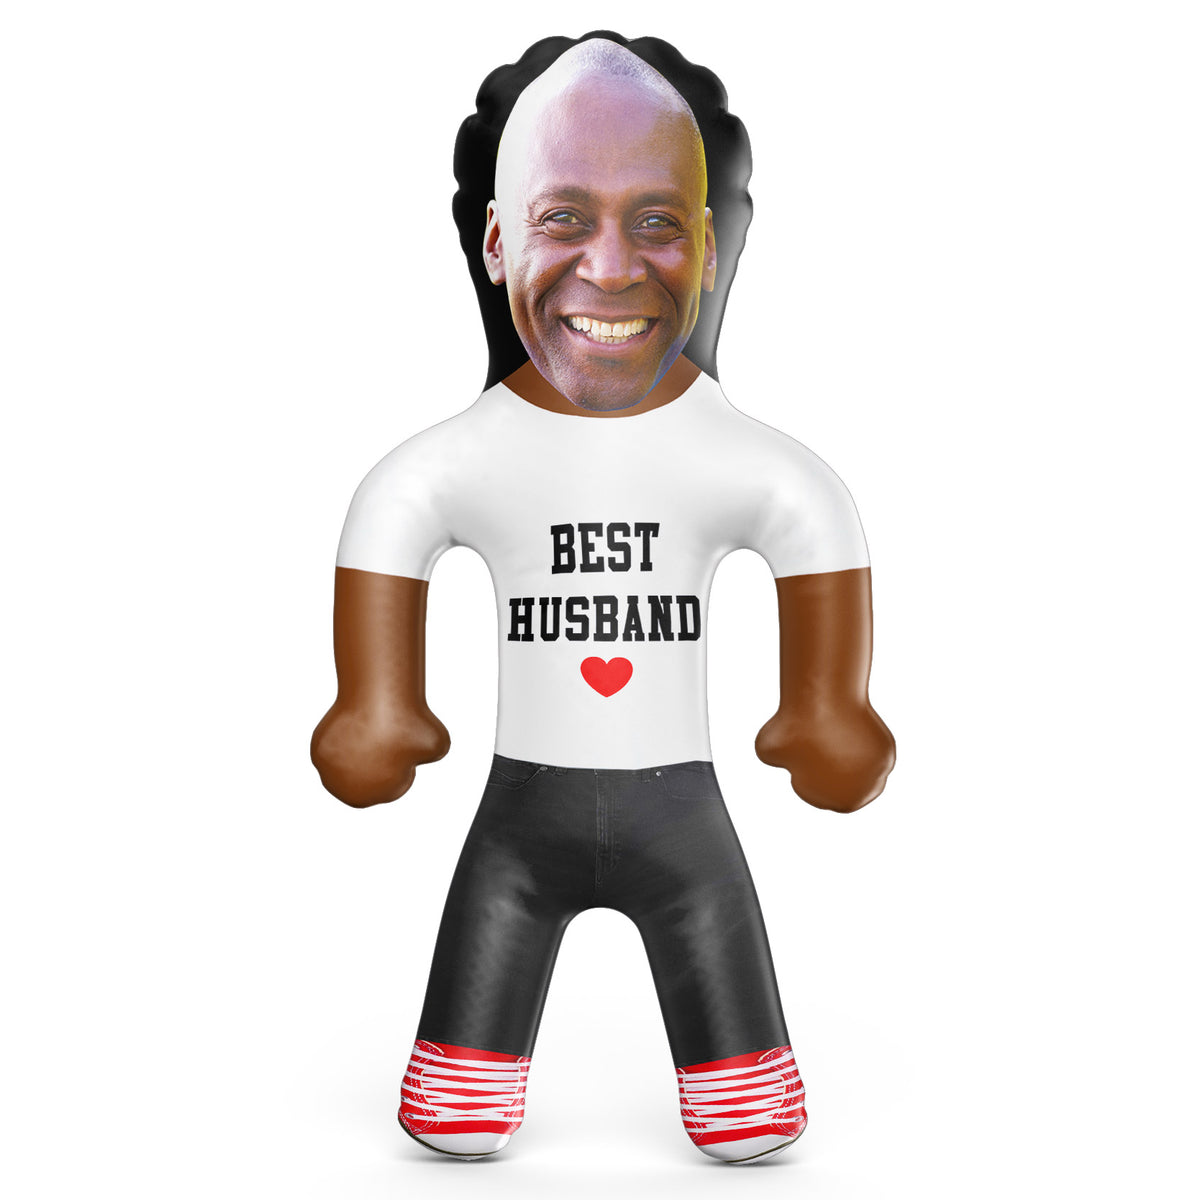 Best Husband Inflatable Doll - Best Husband Blow Up Doll